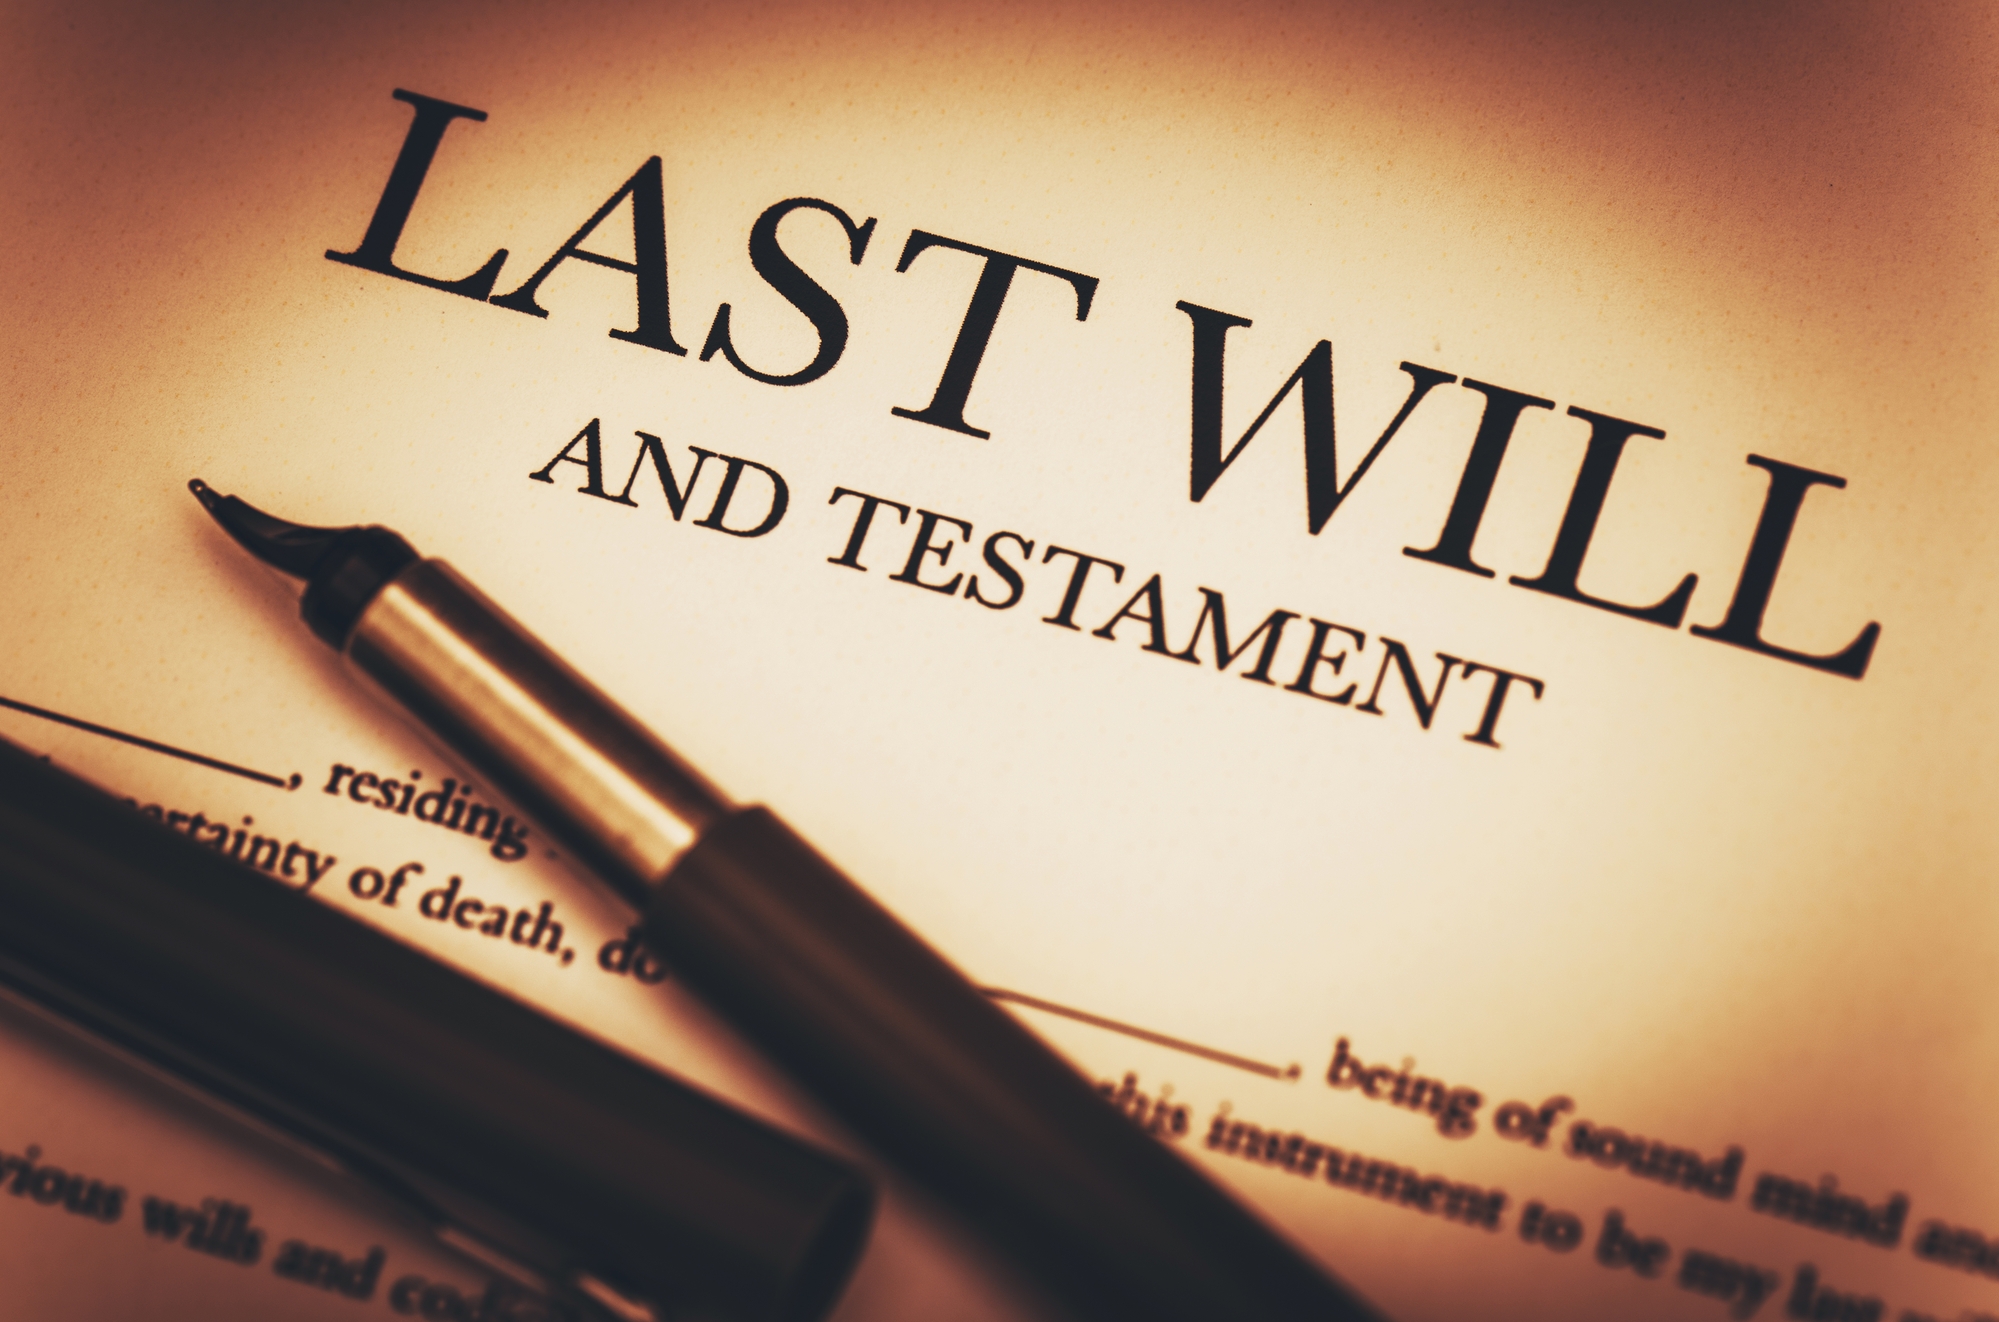 Publication of a Will